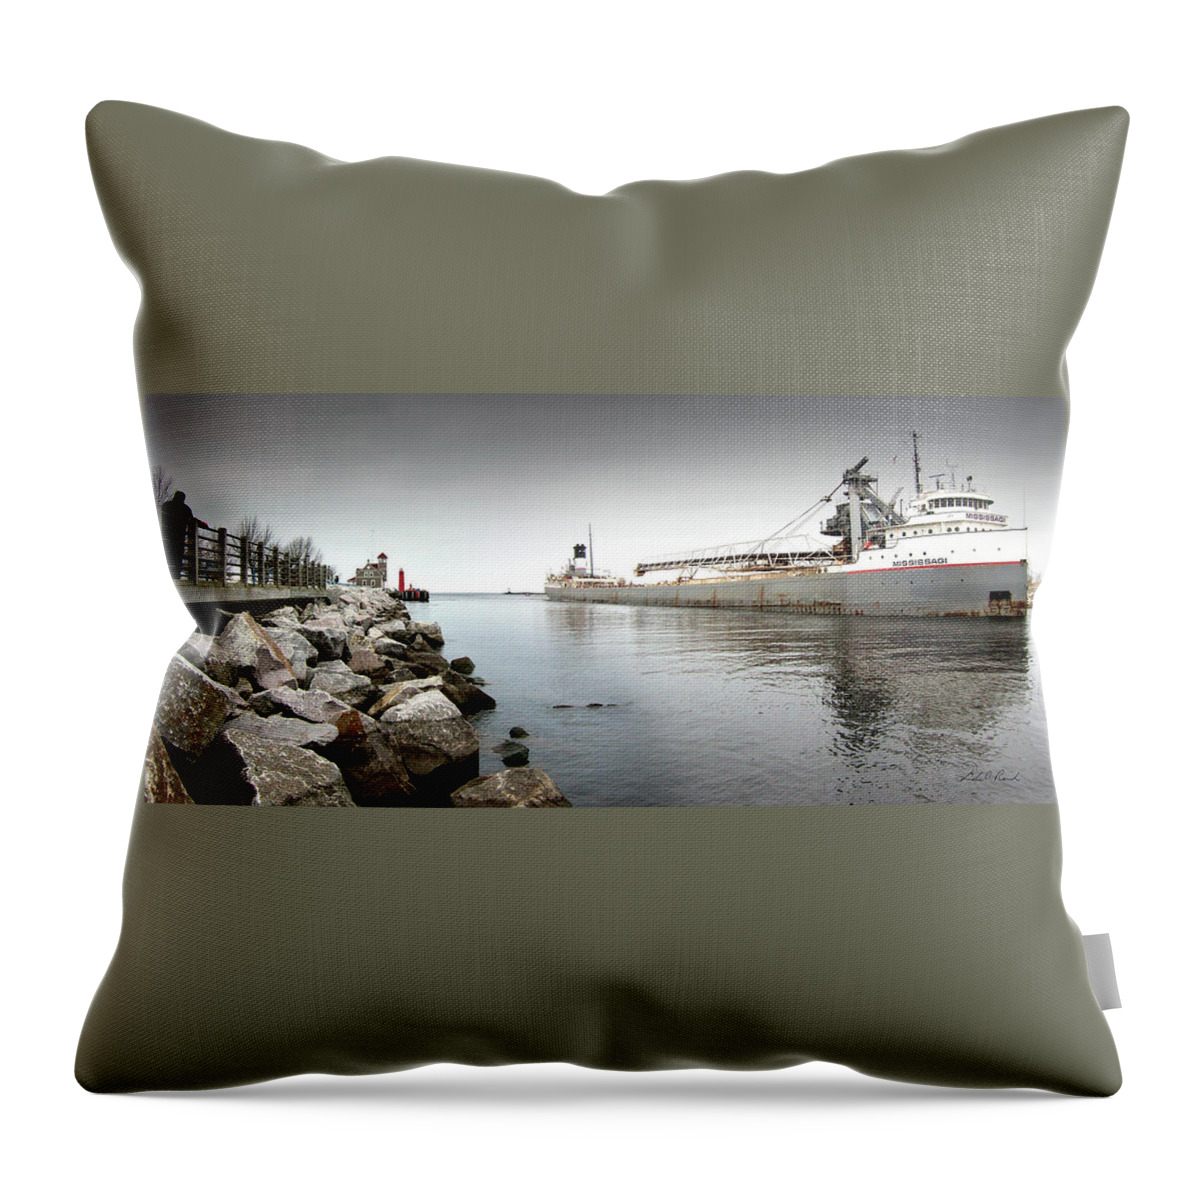 Photography Throw Pillow featuring the photograph Great Lakes Freighter Missisaga by Frederic A Reinecke